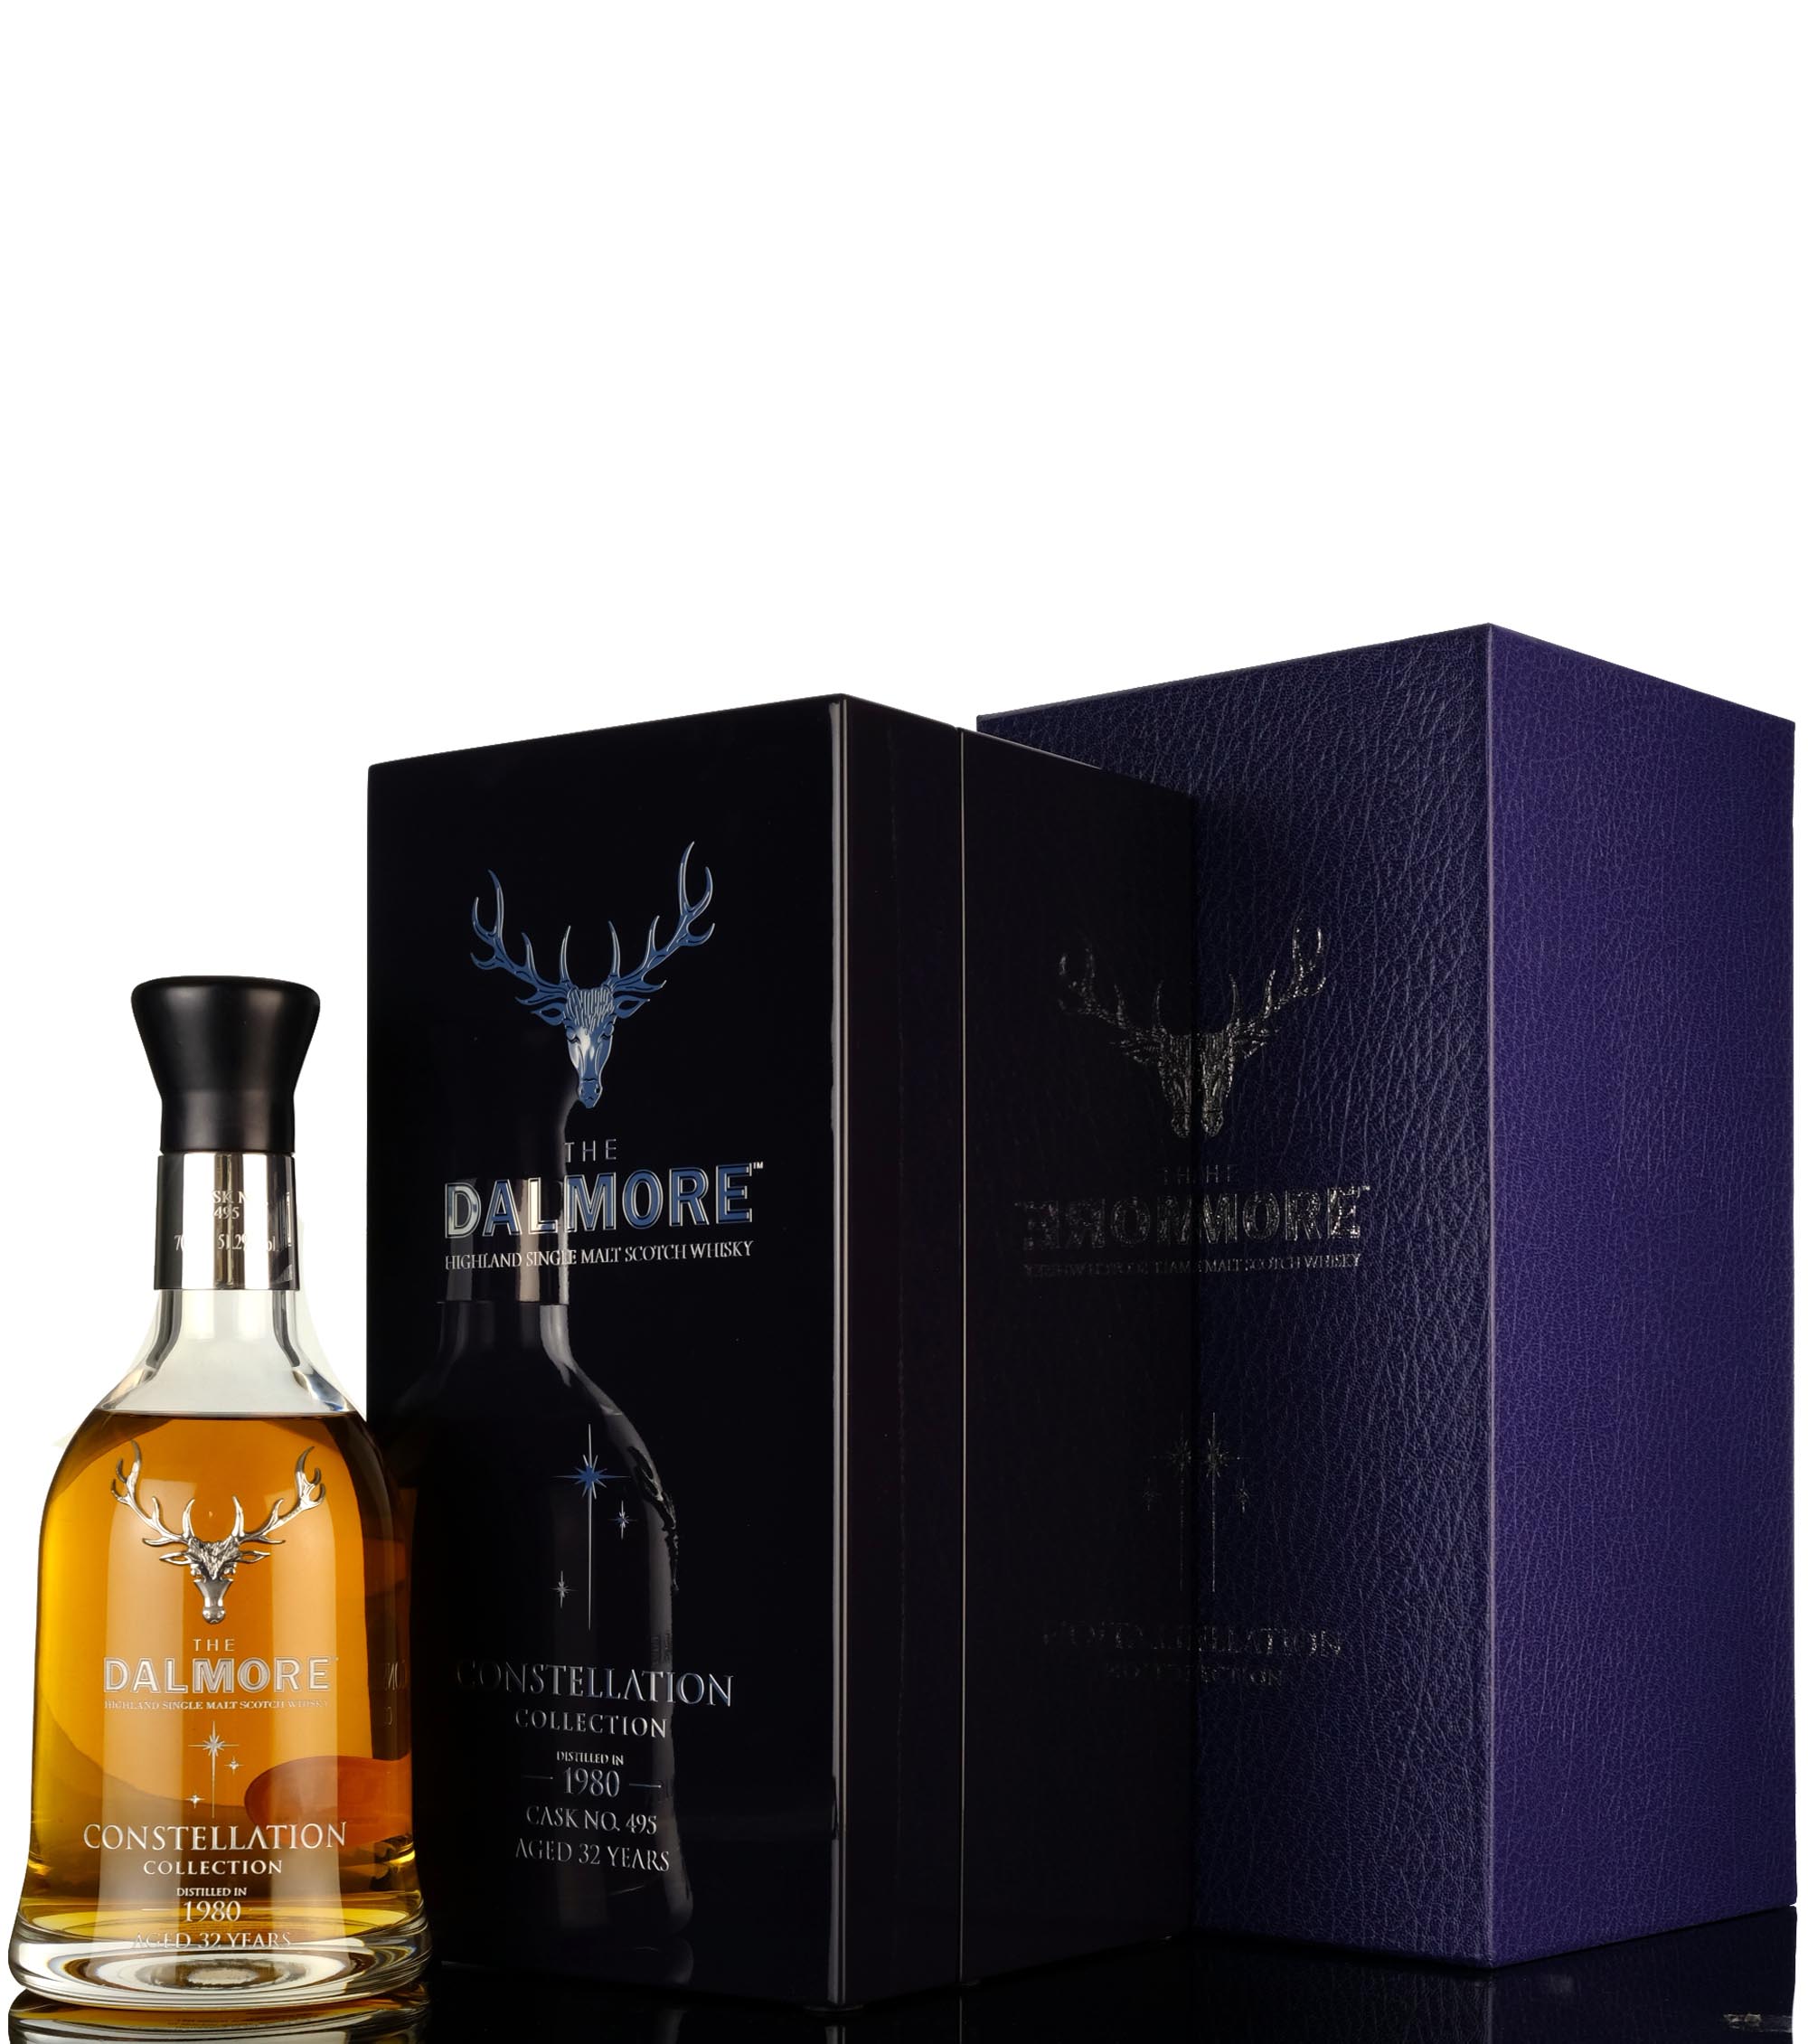 Dalmore 1980-2012 - 32 Year Old - Single Cask 495 - Constellation Collection